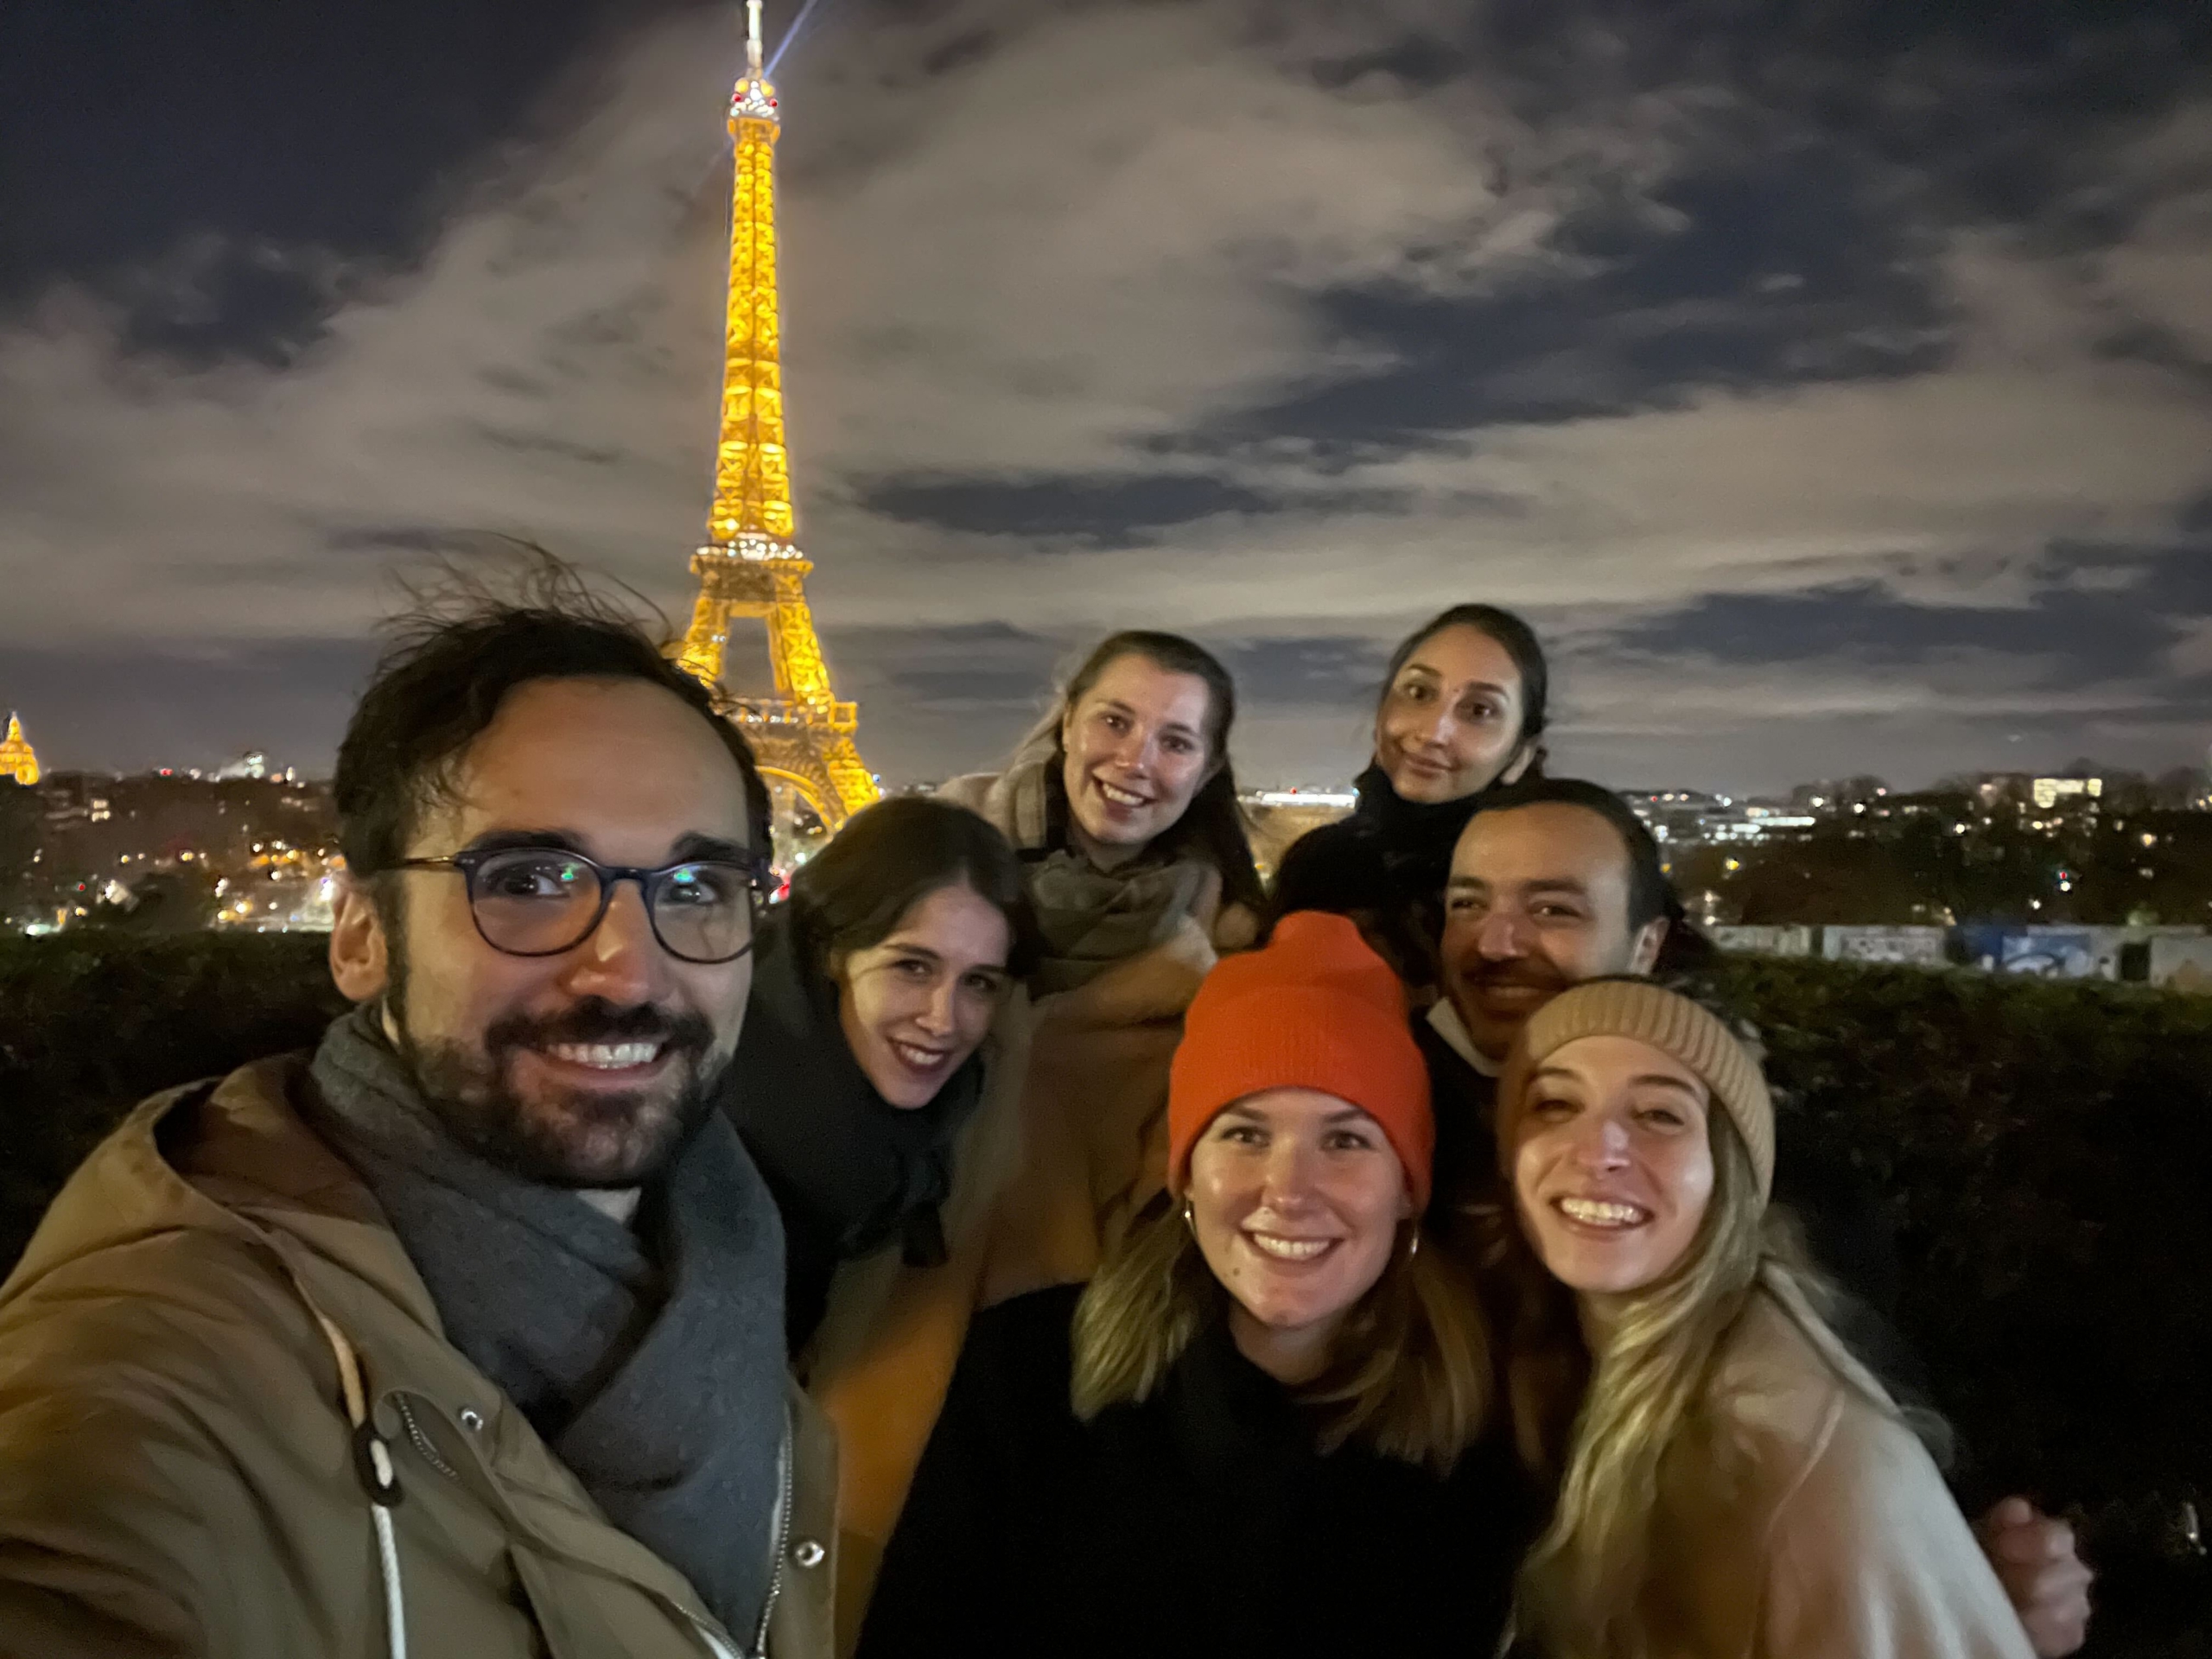 The German and French team in Paris